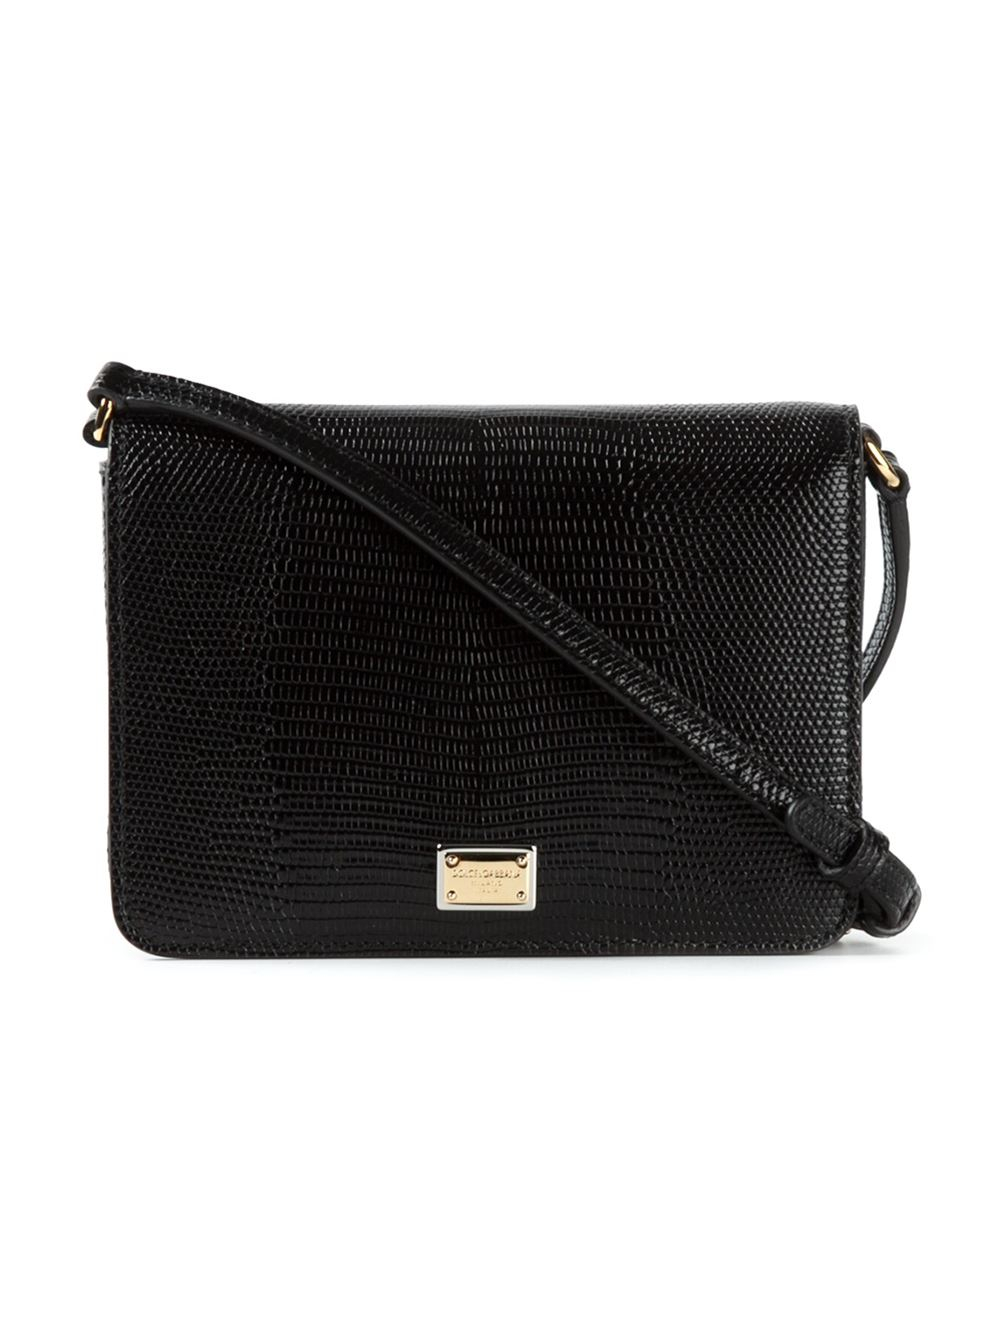 Dolce & Gabbana Small Leather Cross-Body Bag in Black | Lyst